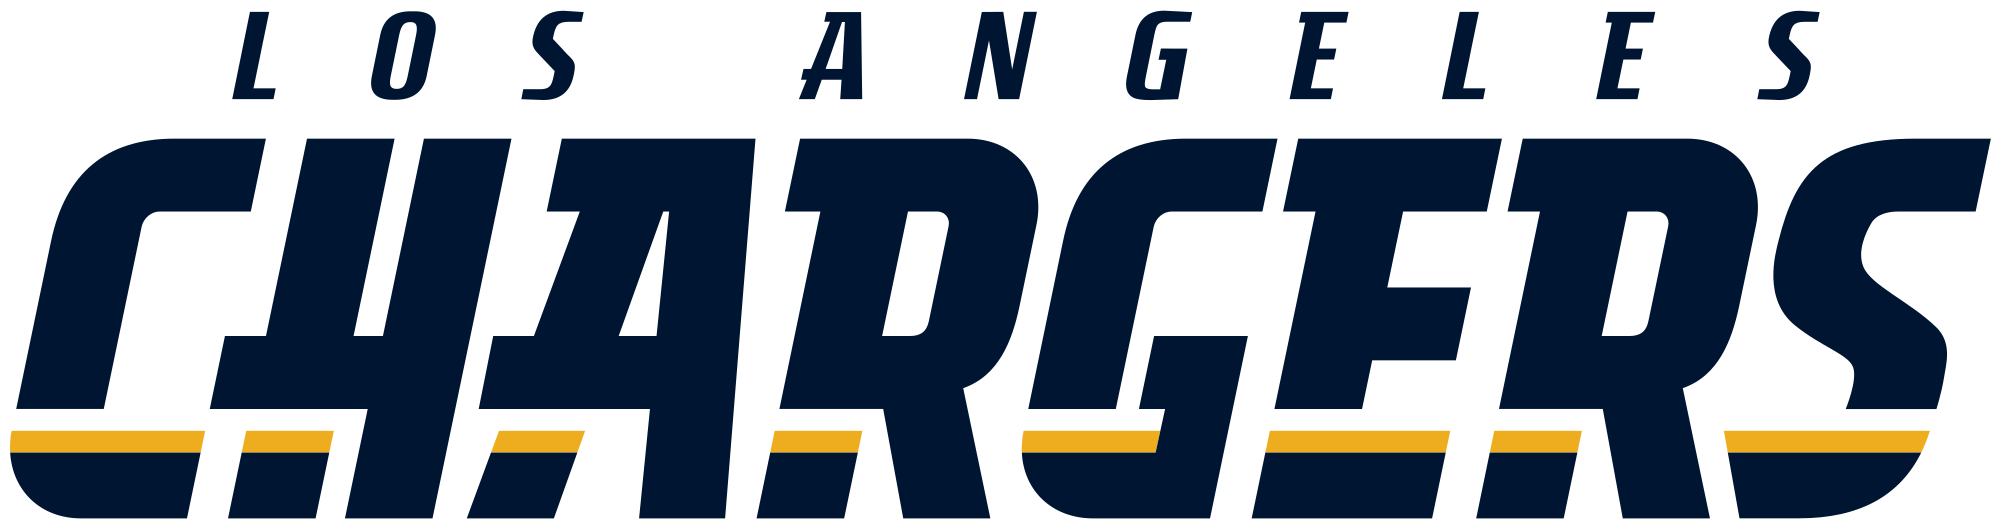 Chargers Football Logo - File:Los Angeles Chargers wordmark.svg - Wikimedia Commons